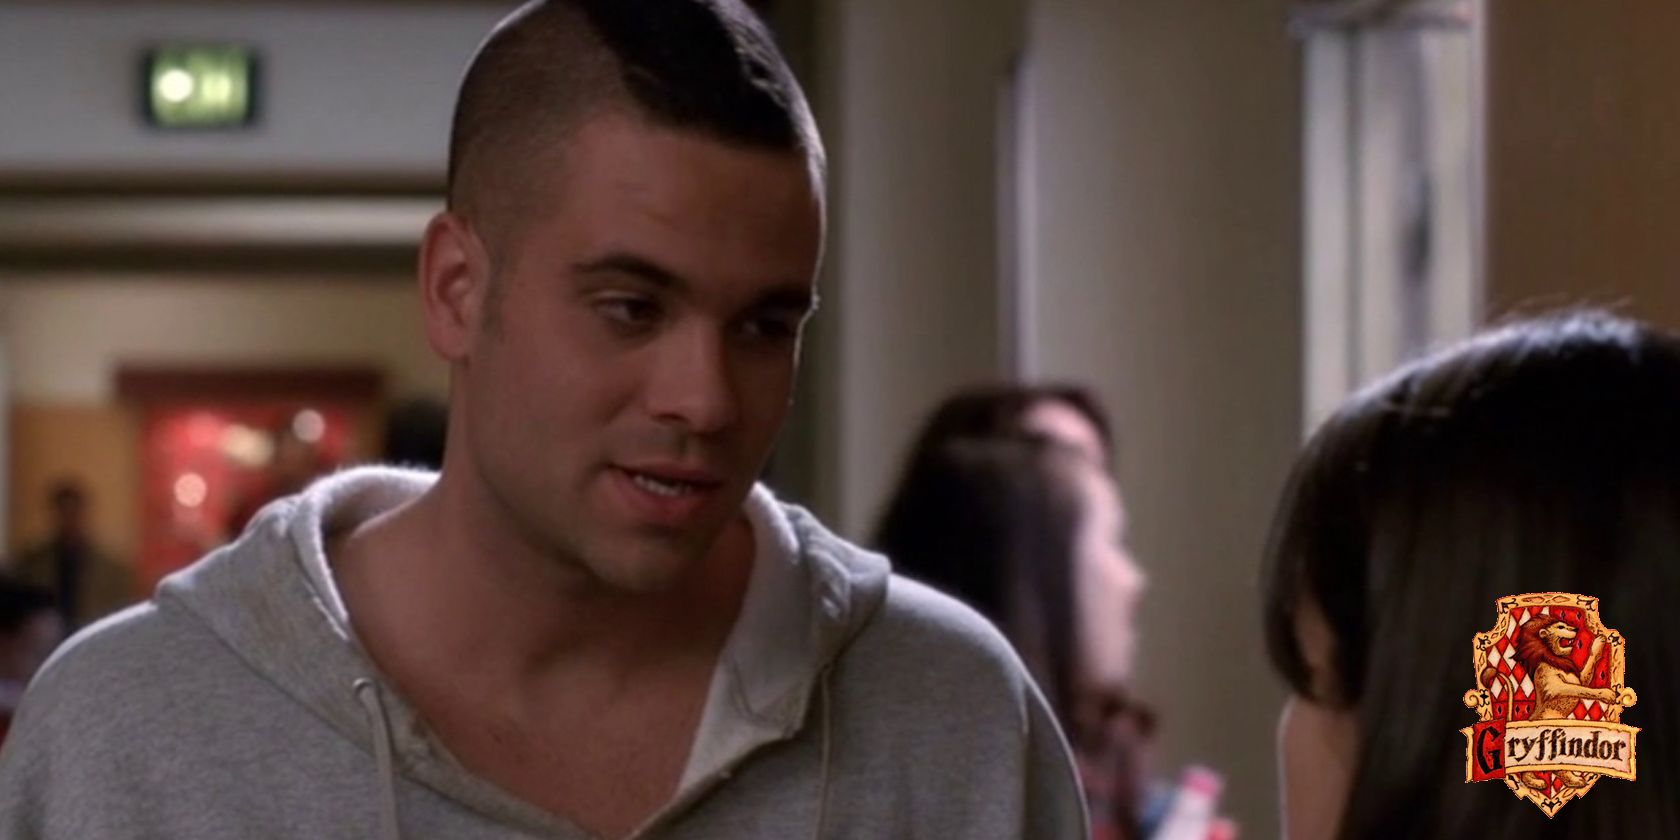 An image of Puck in Glee with the Hogwarts Gryffindor crest in the lower right corner